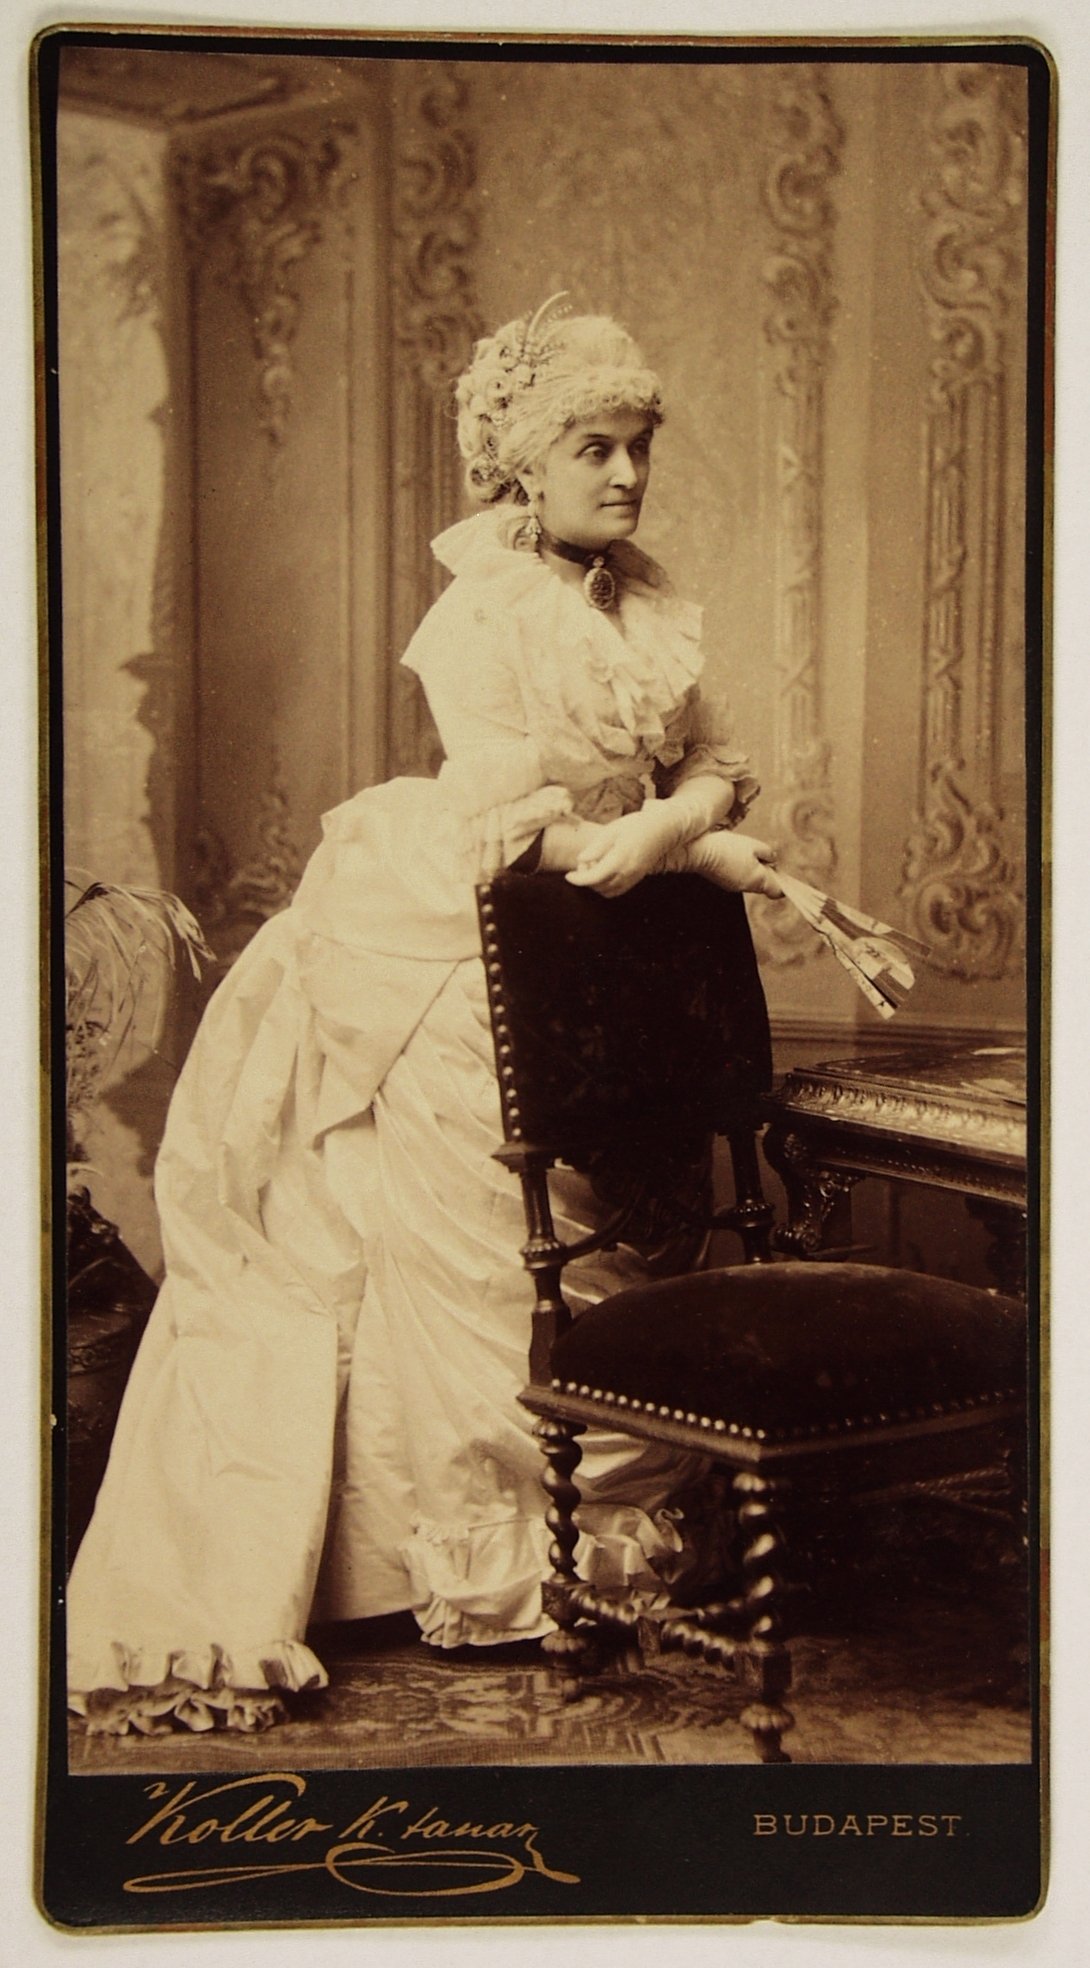  National Archives of Hungary, Festetics family archives, Countess Richárd Berchtold, Erzsébet Bánffy as a lady of the age of Louis XVI of France, 1885